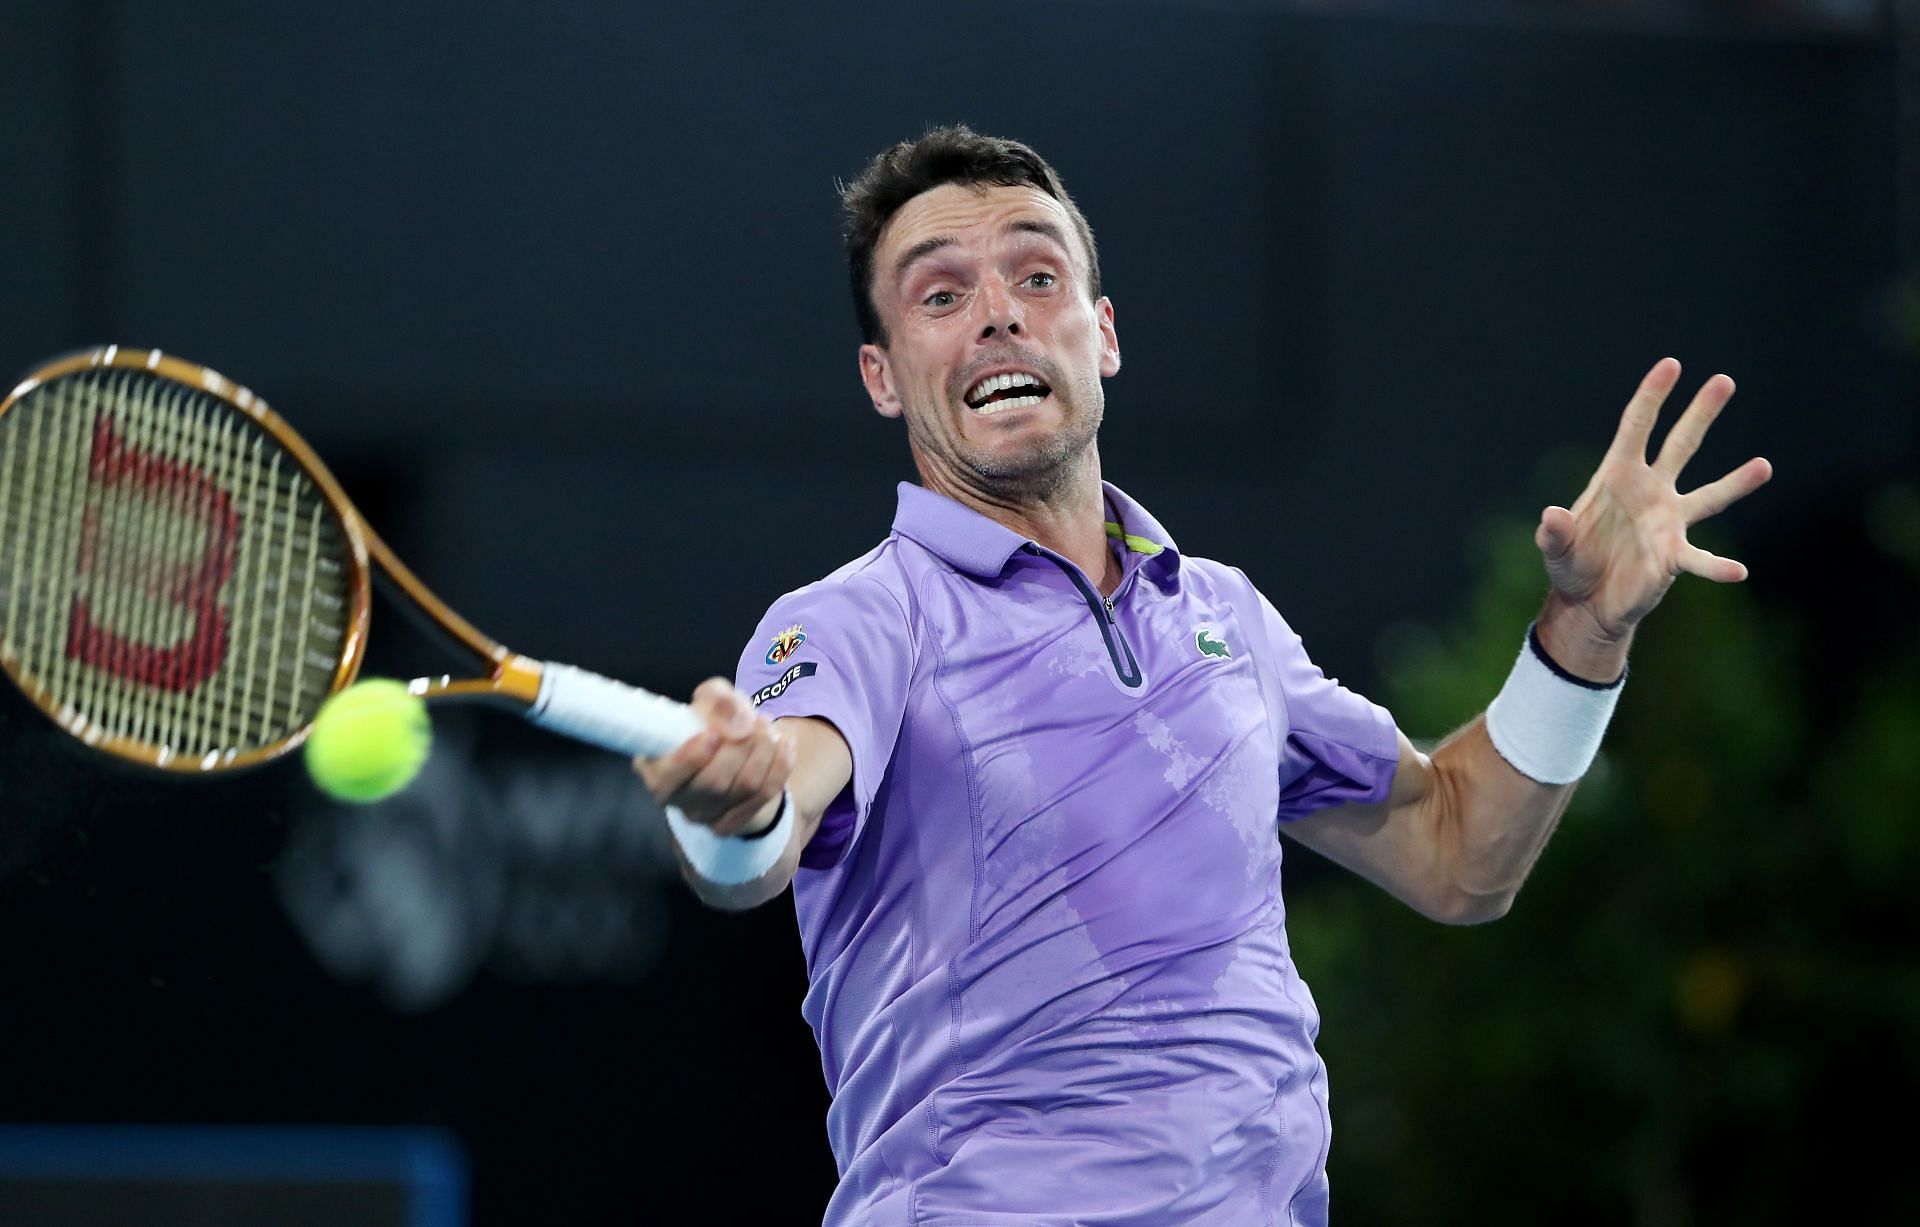 Roberto Bautista Agut in action at the Adelaide International 2